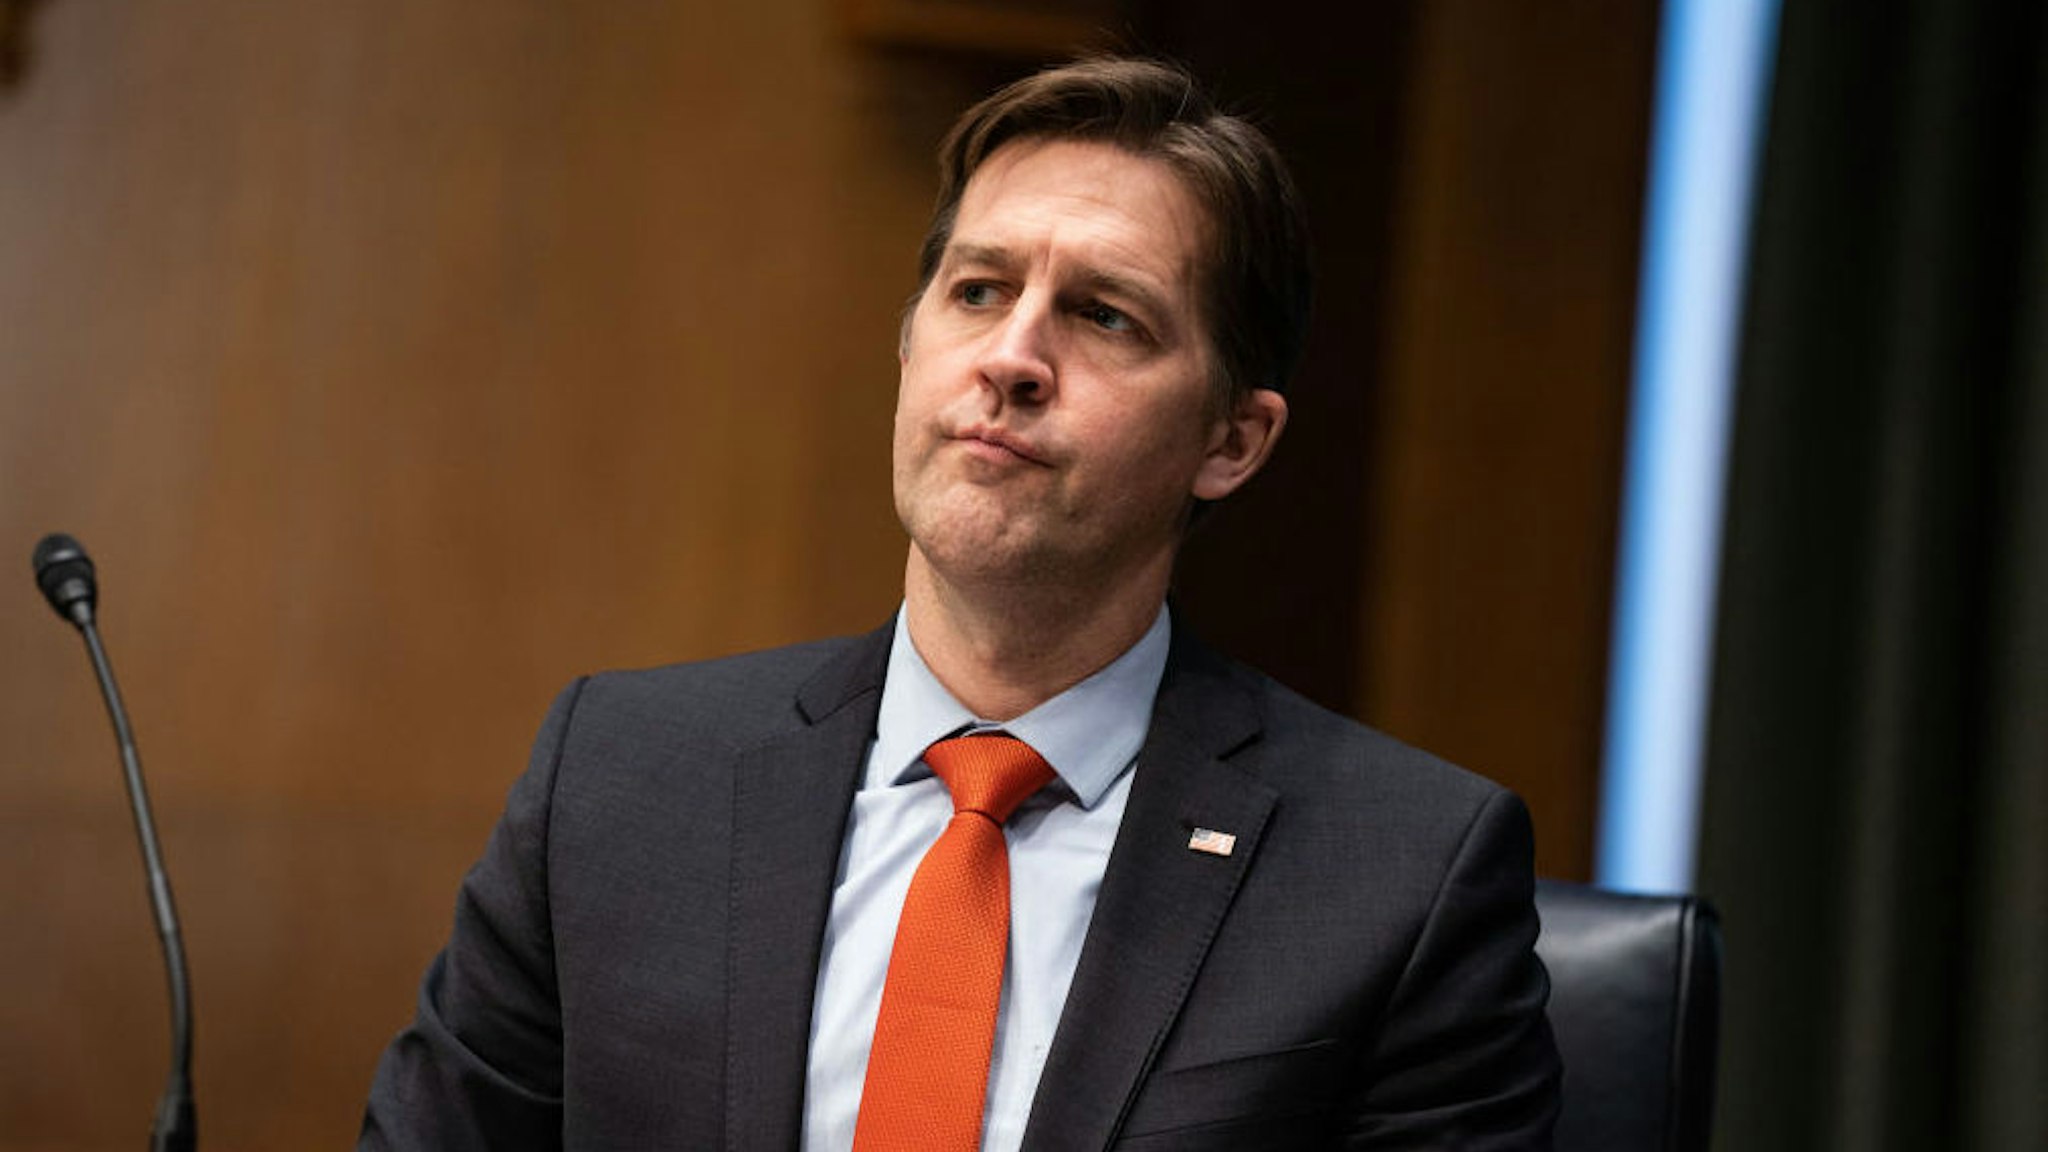 Senator Ben Sasse, R-NE speaks during a hearing for Janet Yellen, President-elect Joe Bidens nominee for Secretary of the Treasury,as she participates in a Senate Finance Committee hearing in Washington DC, on January 19, 2021. - Biden, who will take office on January 20, 2021, has proposed a $1.9 trillion rescue package to help businesses and families struggling amid the pandemic, and Yellen would be tasked with getting that massive bill through a Congress where some are wary of the skyrocketing budget deficit.